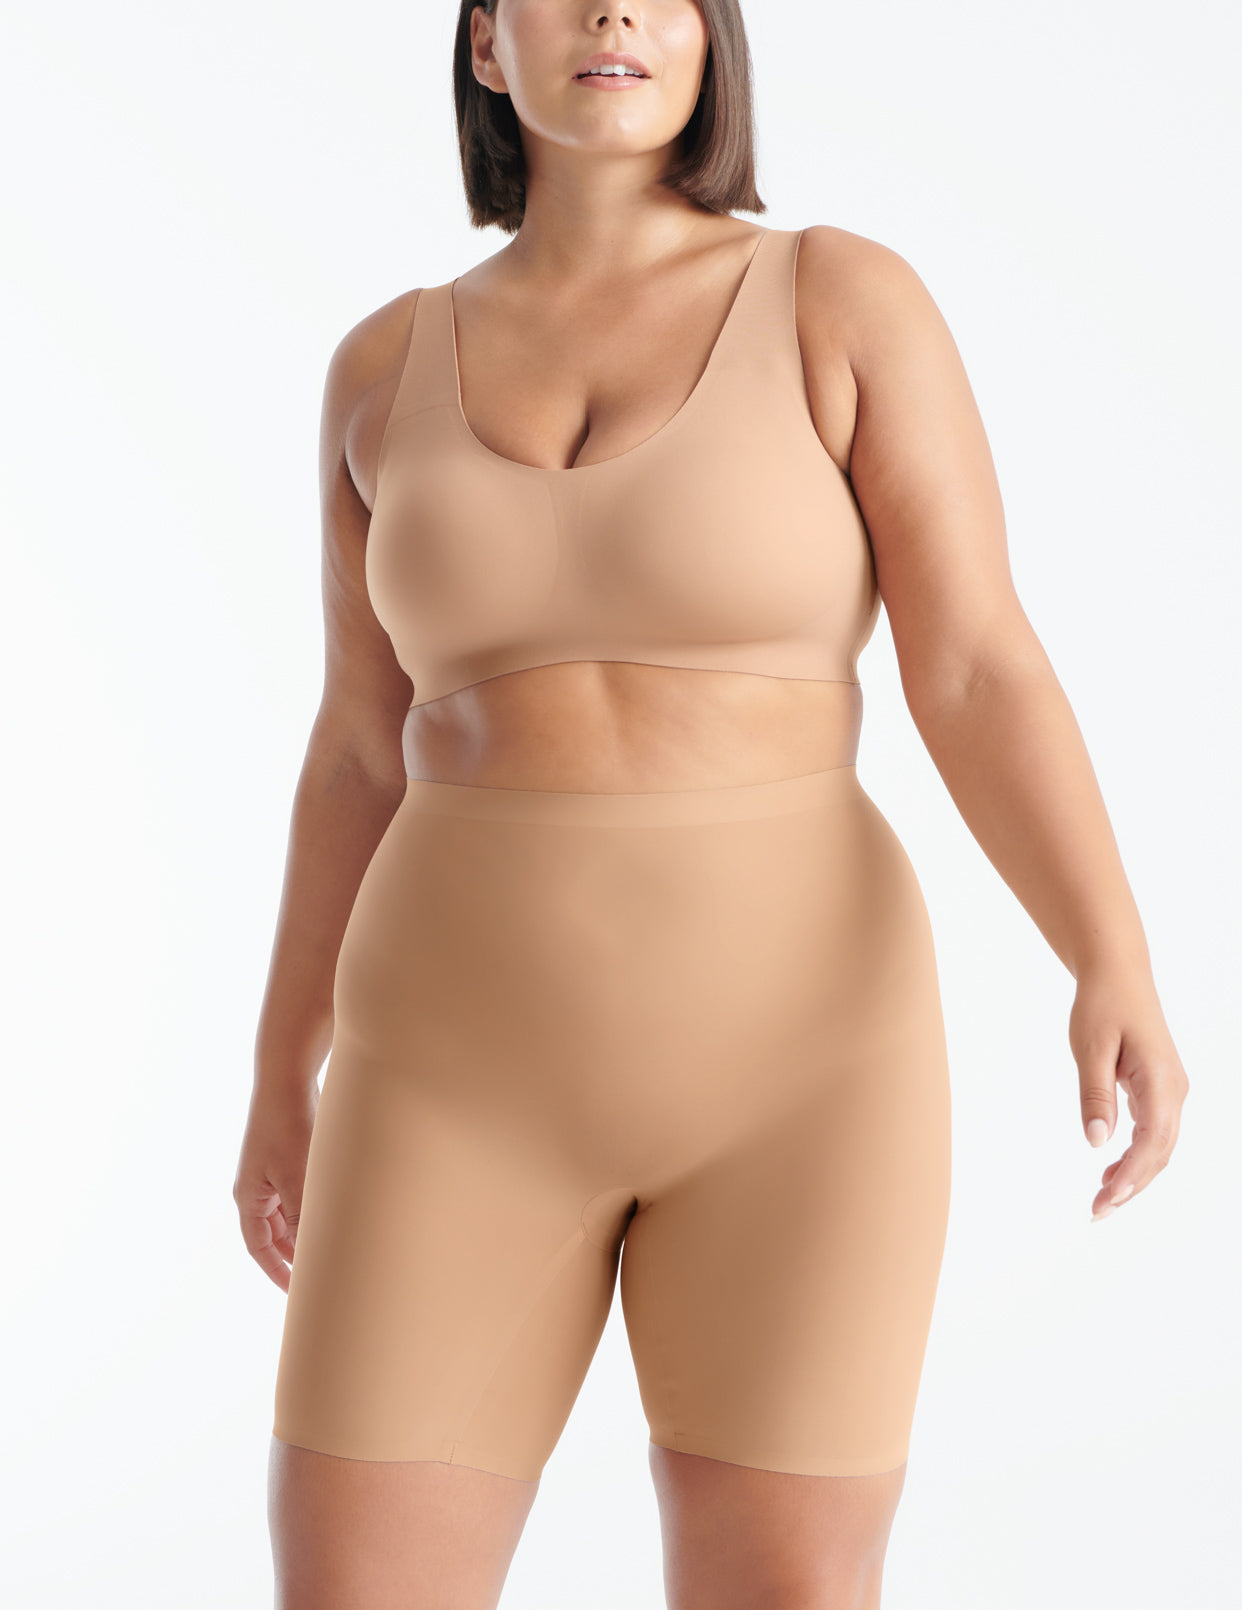 Maya has 45.5" hips and wears a Knix size XL 